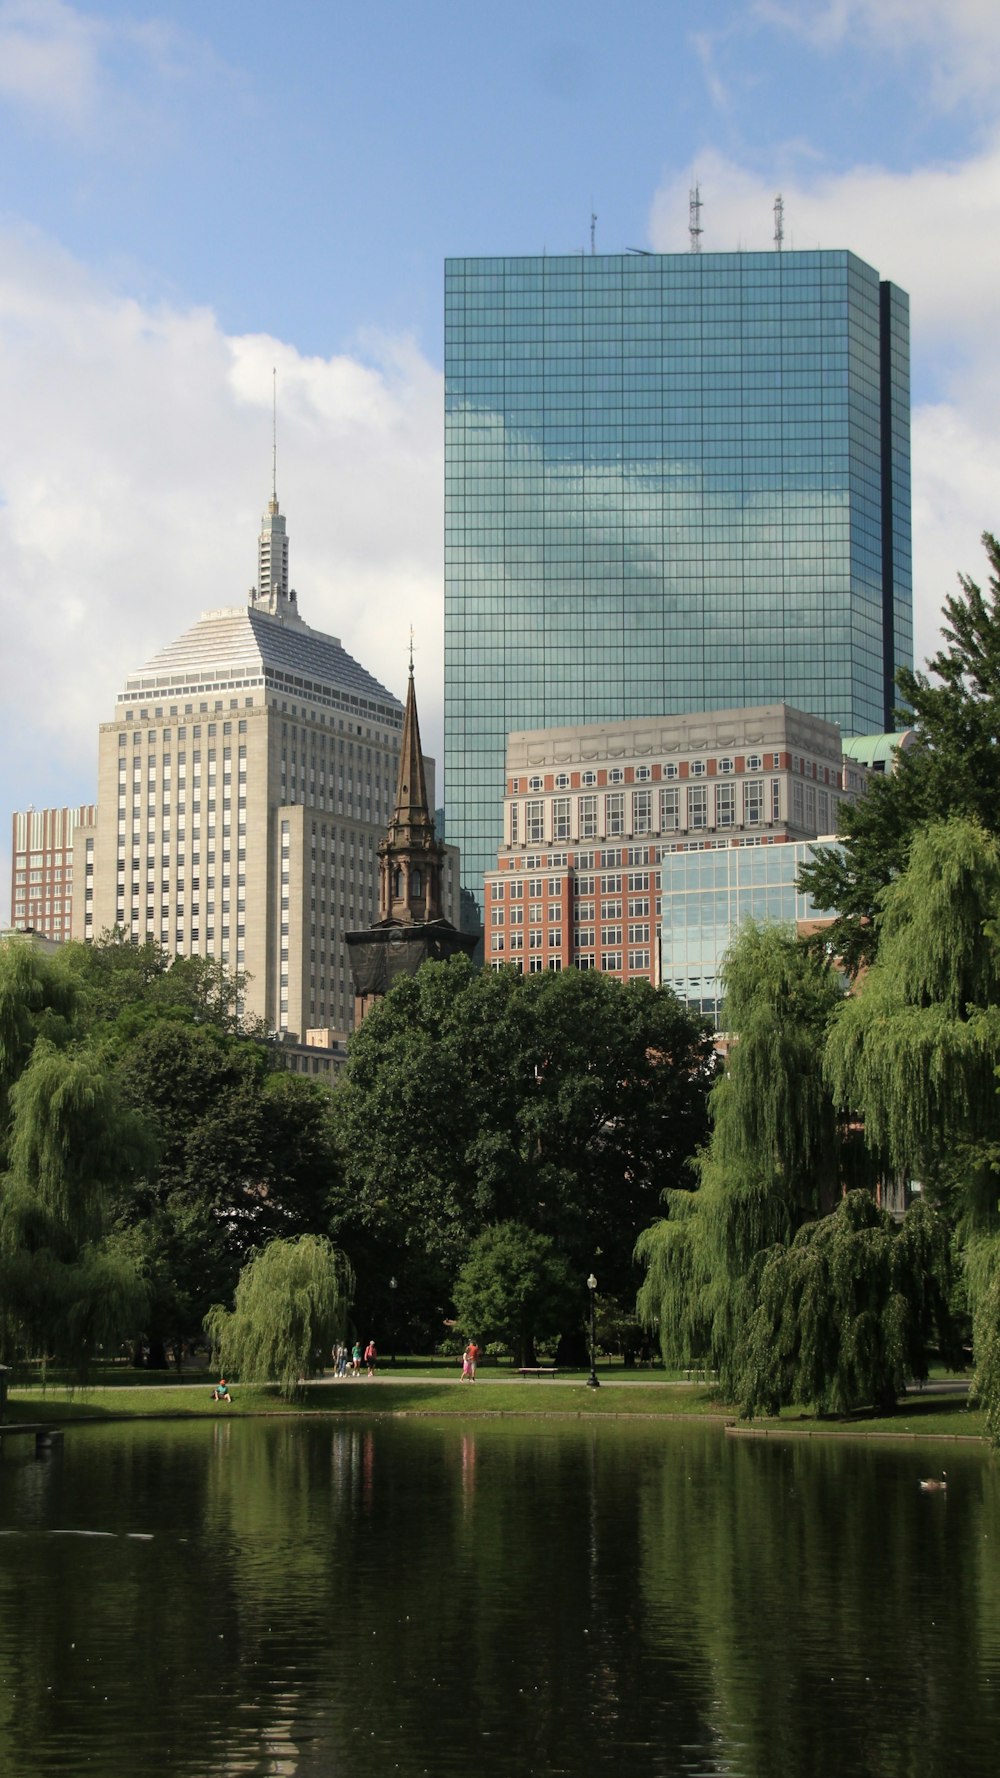 a lake in a city park with tall buildings in the background